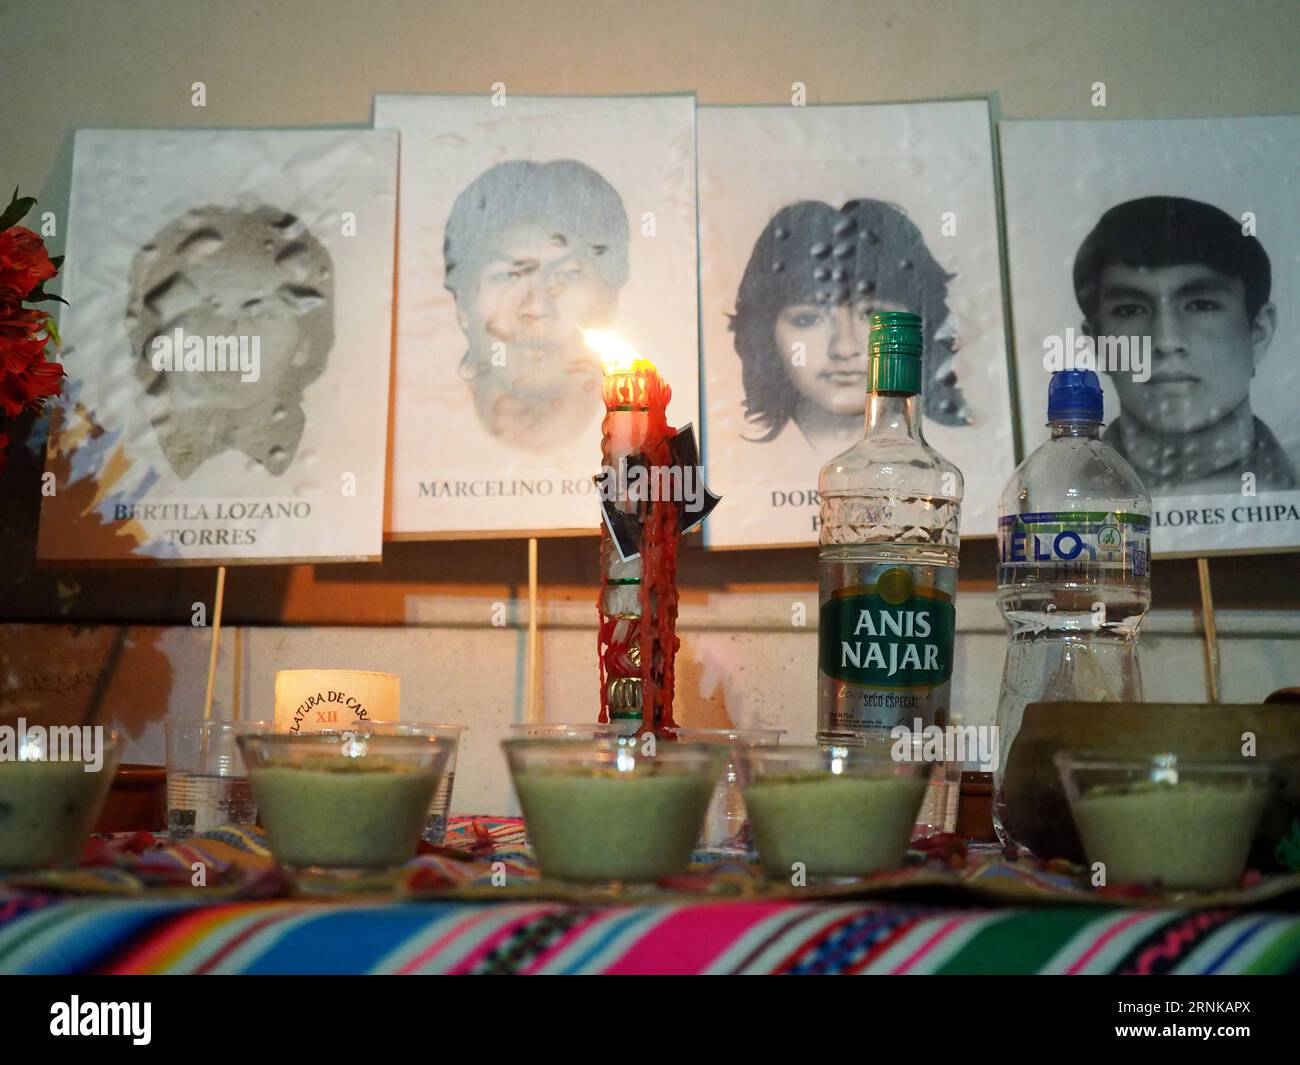 Portraits of the victims at the funeral of some of the skeletal remains of the students: Bertila Lozano Torres, Dora Oyague Fierro, Armando Amaro Condor, Felipe Flores Chipana and Marcelino Rosales Cárdenas victims of the massacre at La Cantuta University, restored to their families almost 32 years after the massacre. The massacre took place in Lima on July 18, 1992 during the presidency of Alberto Fujimori; when a university professor and nine students from the Enrique Guzman y Valle National University of Education, known as La Cantuta, were kidnapped, disappeared, killed and burned by the C Stock Photo